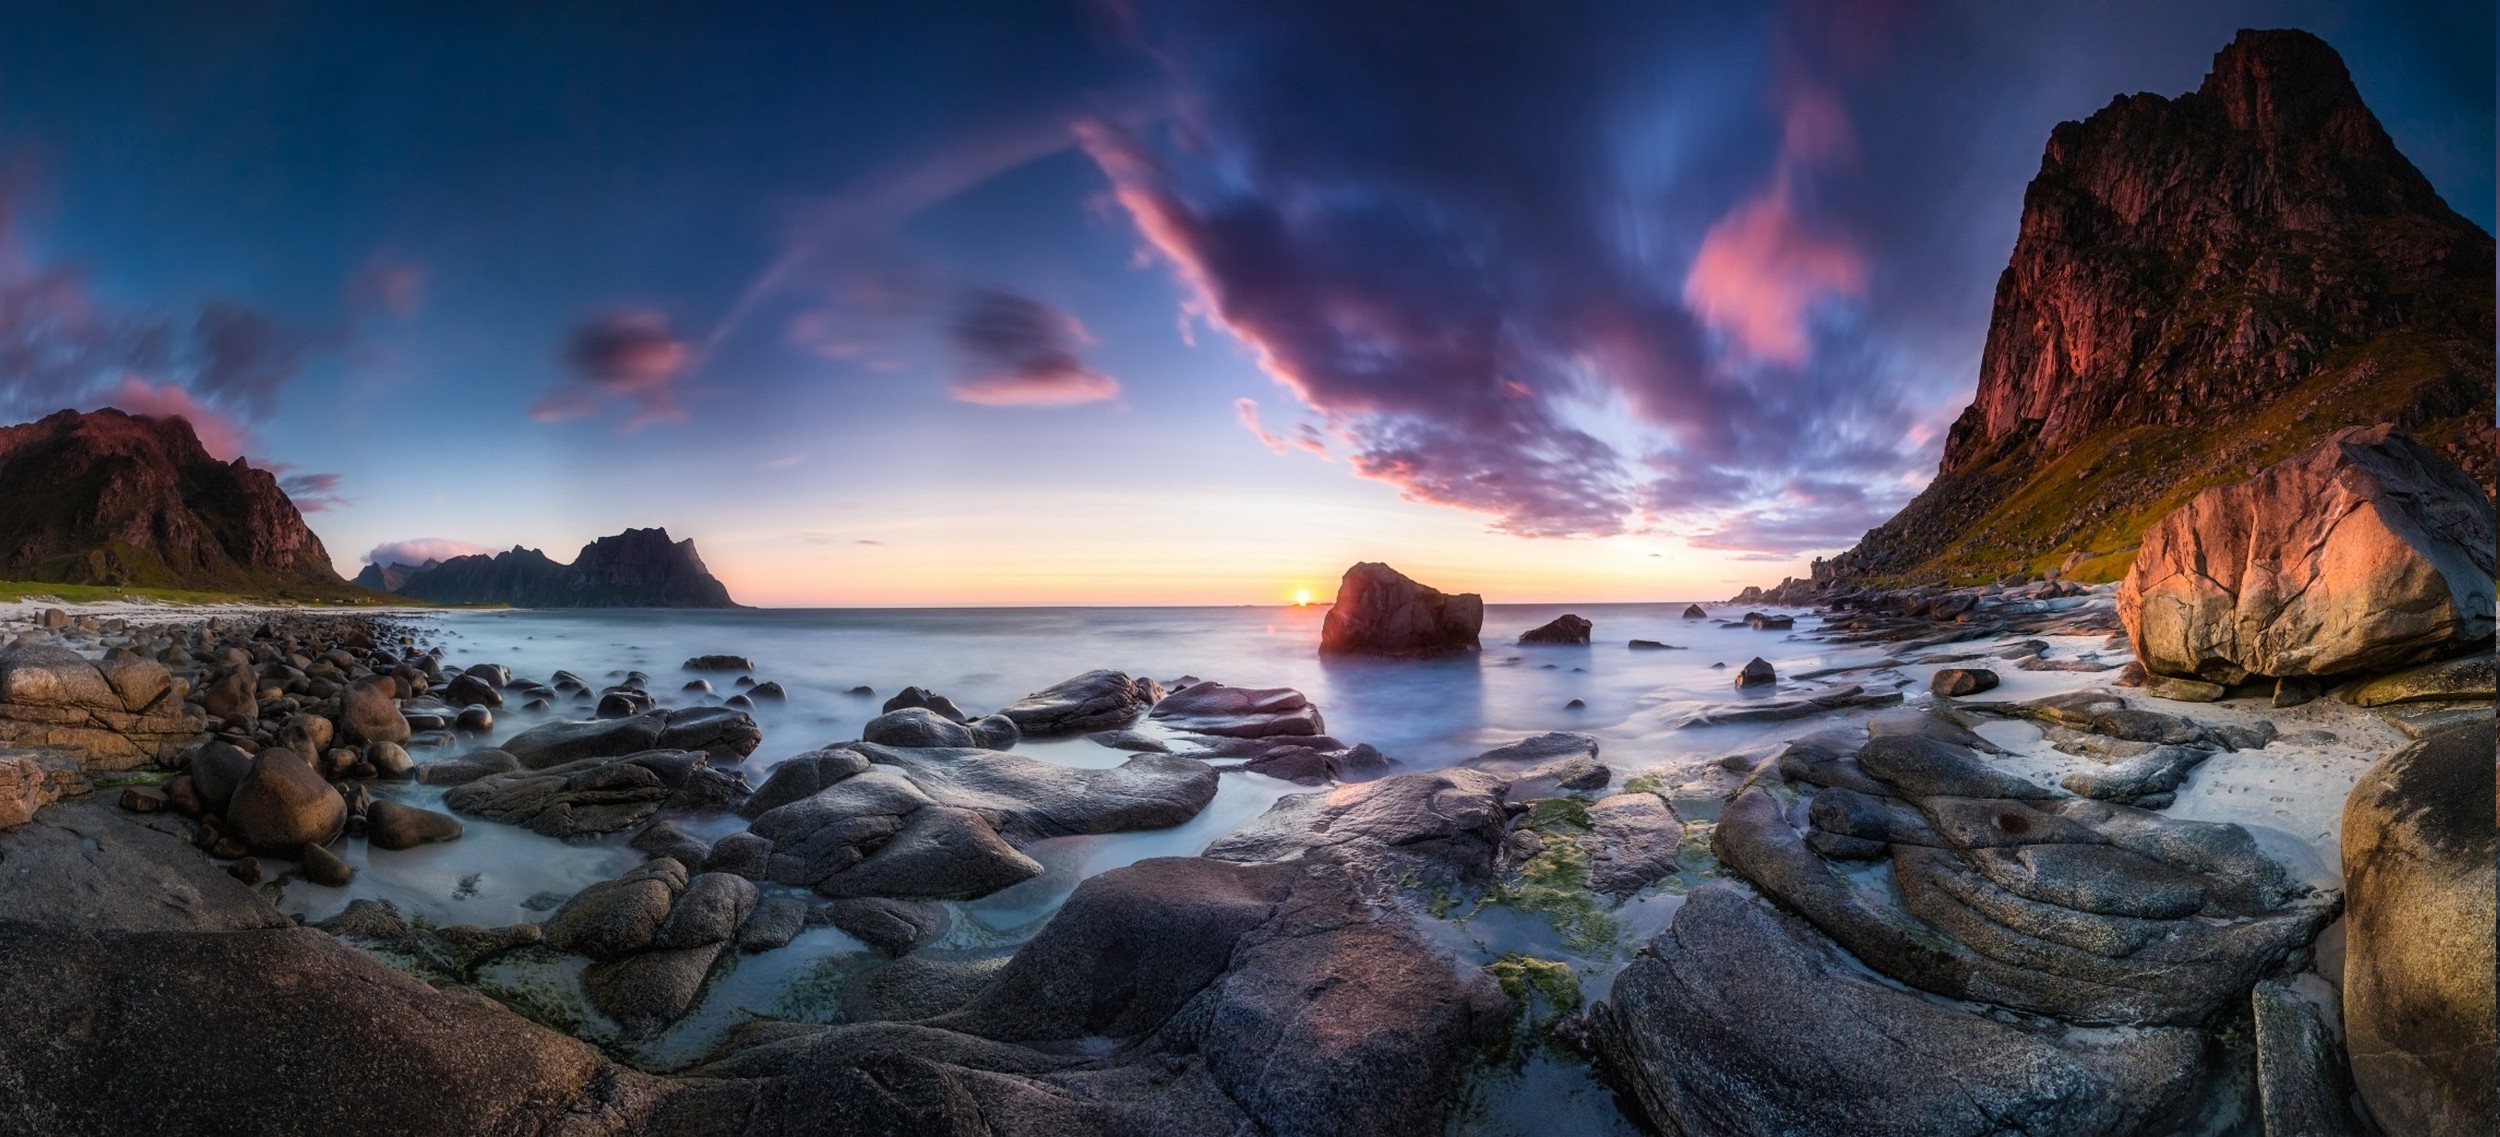 long Exposure, Sunset, Beach, Cliff, Clouds, Rock, Sea, Norway, Nature